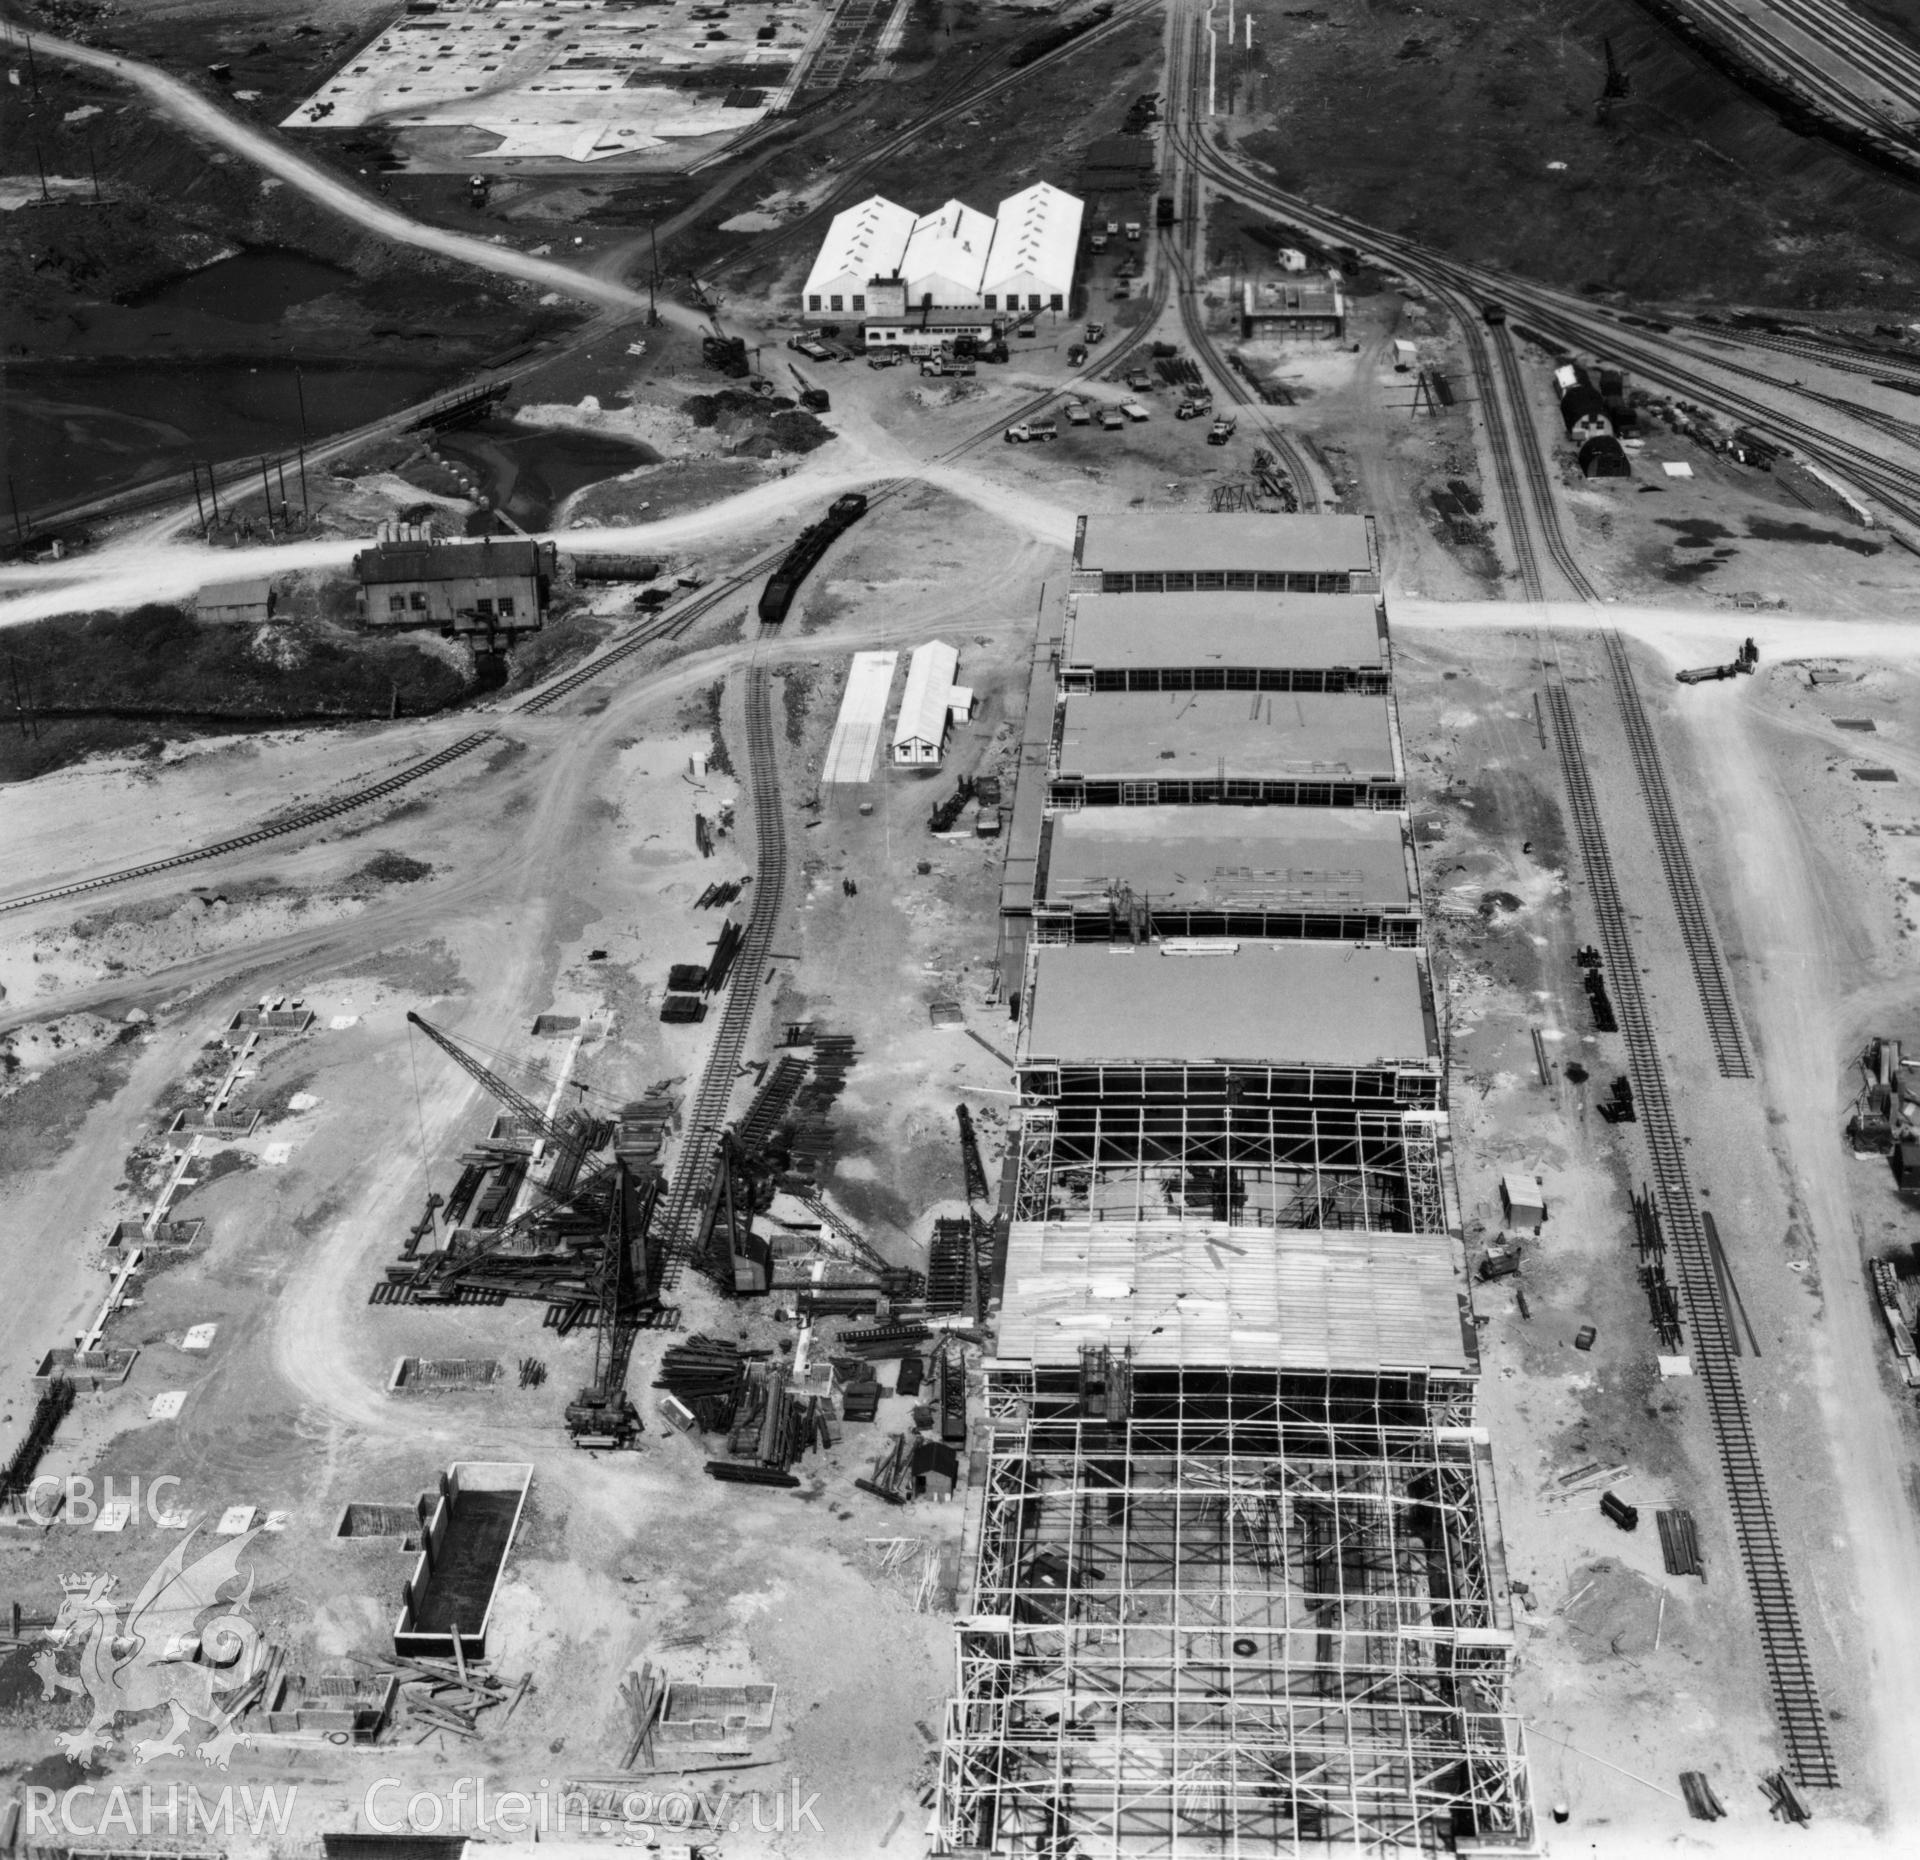 General view of Margam Steelworks, Port Talbot, under construction. Oblique aerial photograph, 5?" cut roll film.